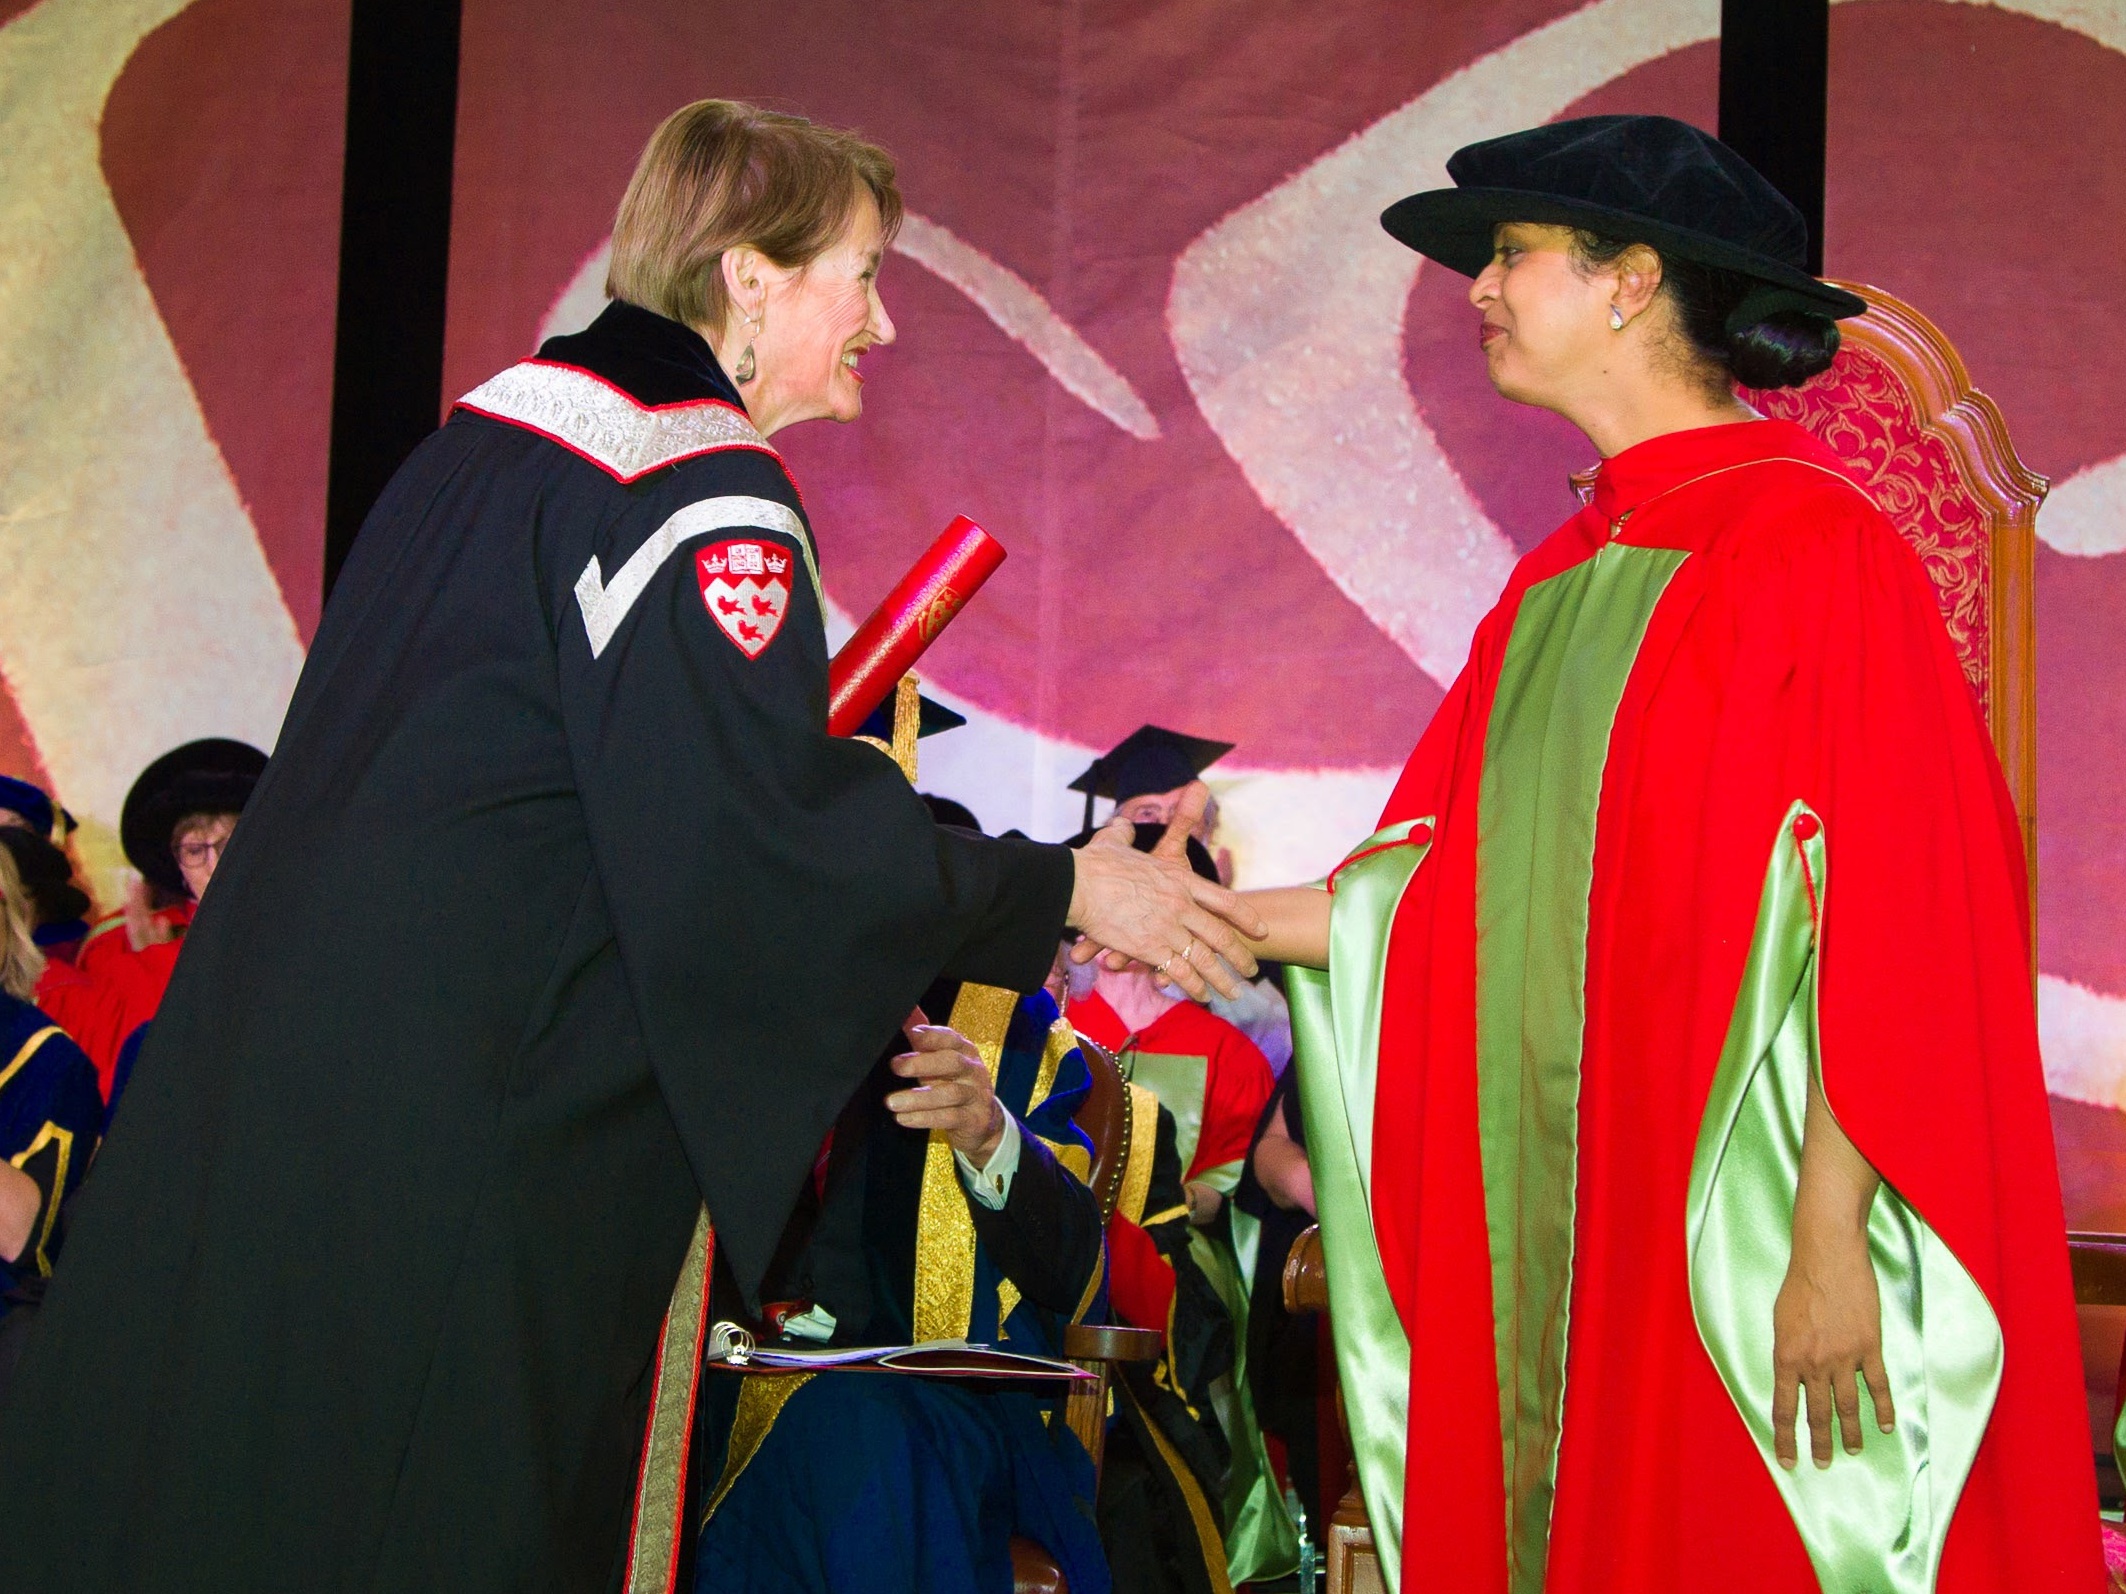 McGill Principal Suzanne Fortier shaking hands with an award winner at convocation